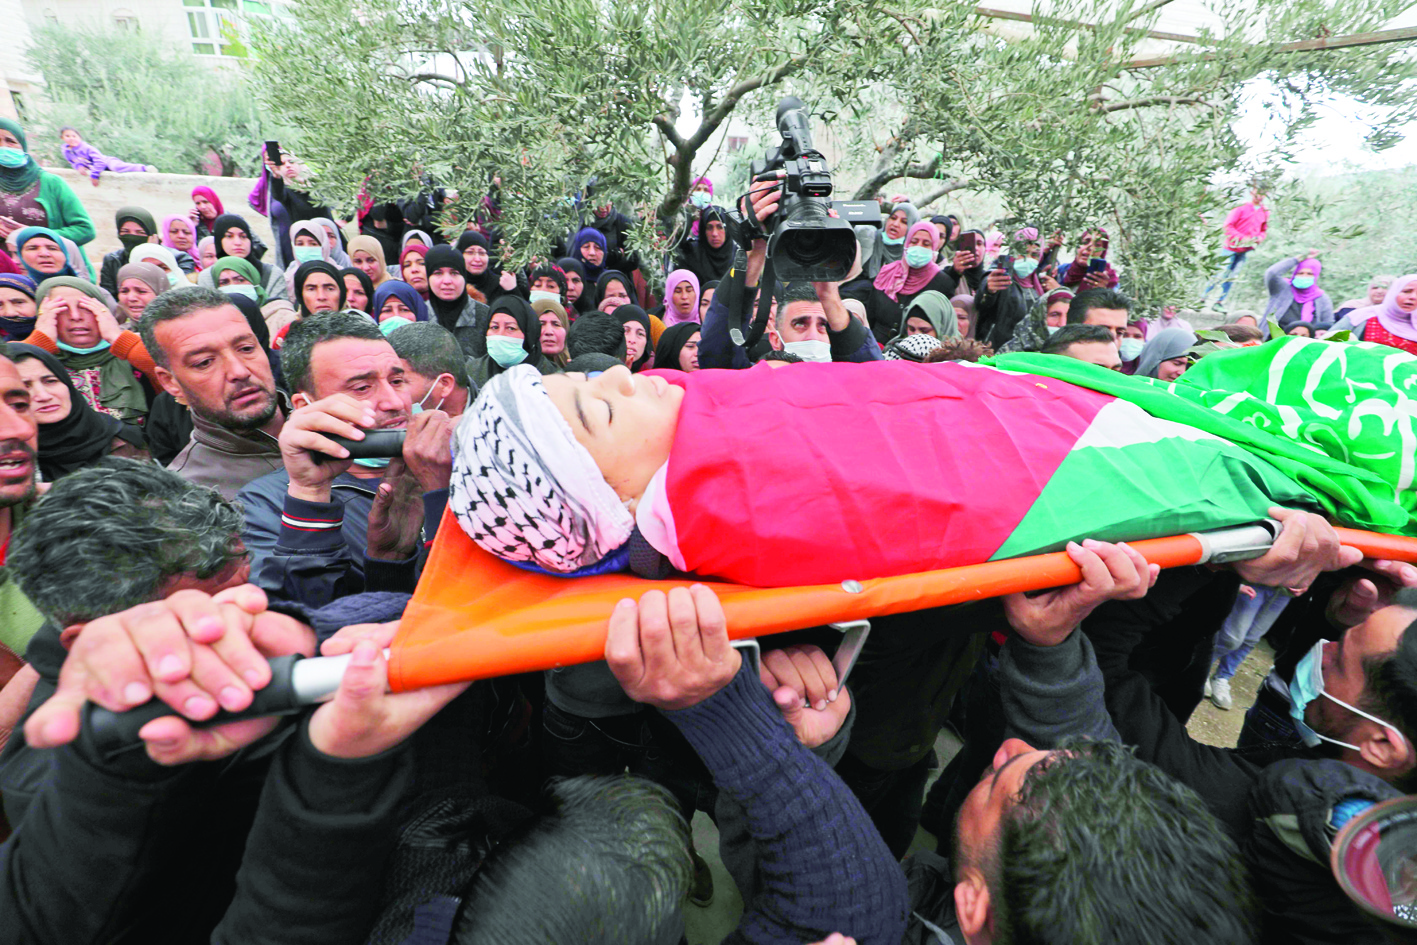 Mourners carry the body of Palestinian teenager Ali Abu Alia during his funeral in the village of Mughayir near Ramallah in the Israeli-occupied West Bank, on December 5, 2020. - A Palestinian teenager was killed in clashes with the Israeli army on the sidelines of a protest in the occupied West Bank, the Palestinian health ministry said. (Photo by ABBAS MOMANI / AFP)